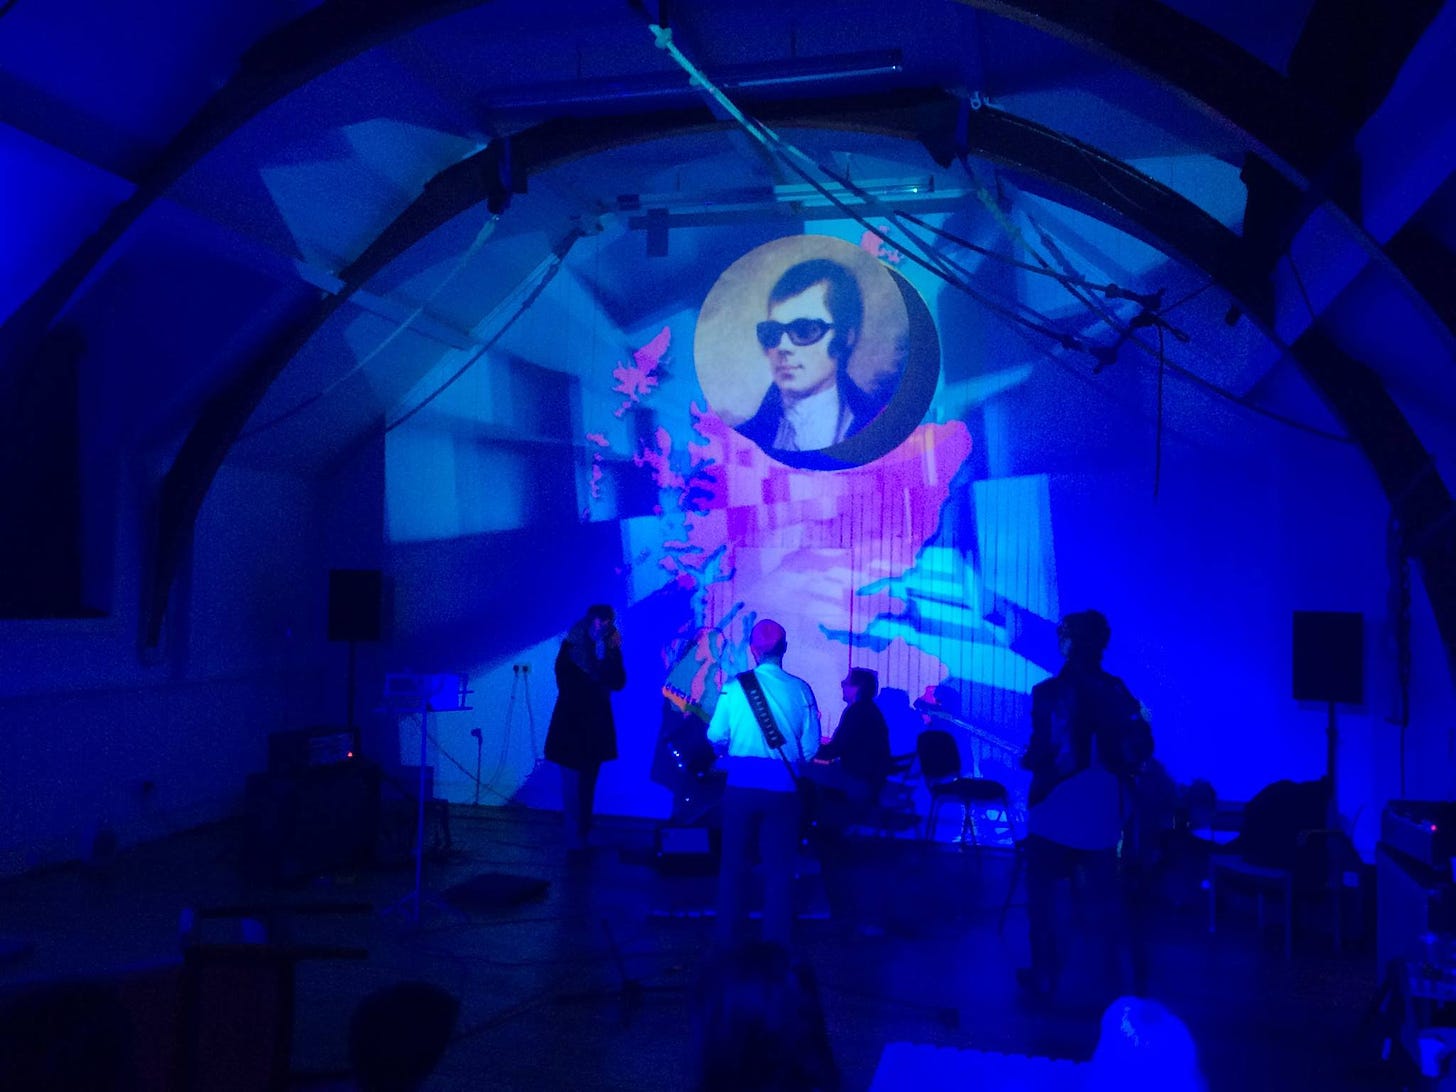 A large space with domed ceiling. An image of Robbie Burns is projected onto a map of Scotland onto the back wall. The lighting is blue and red.